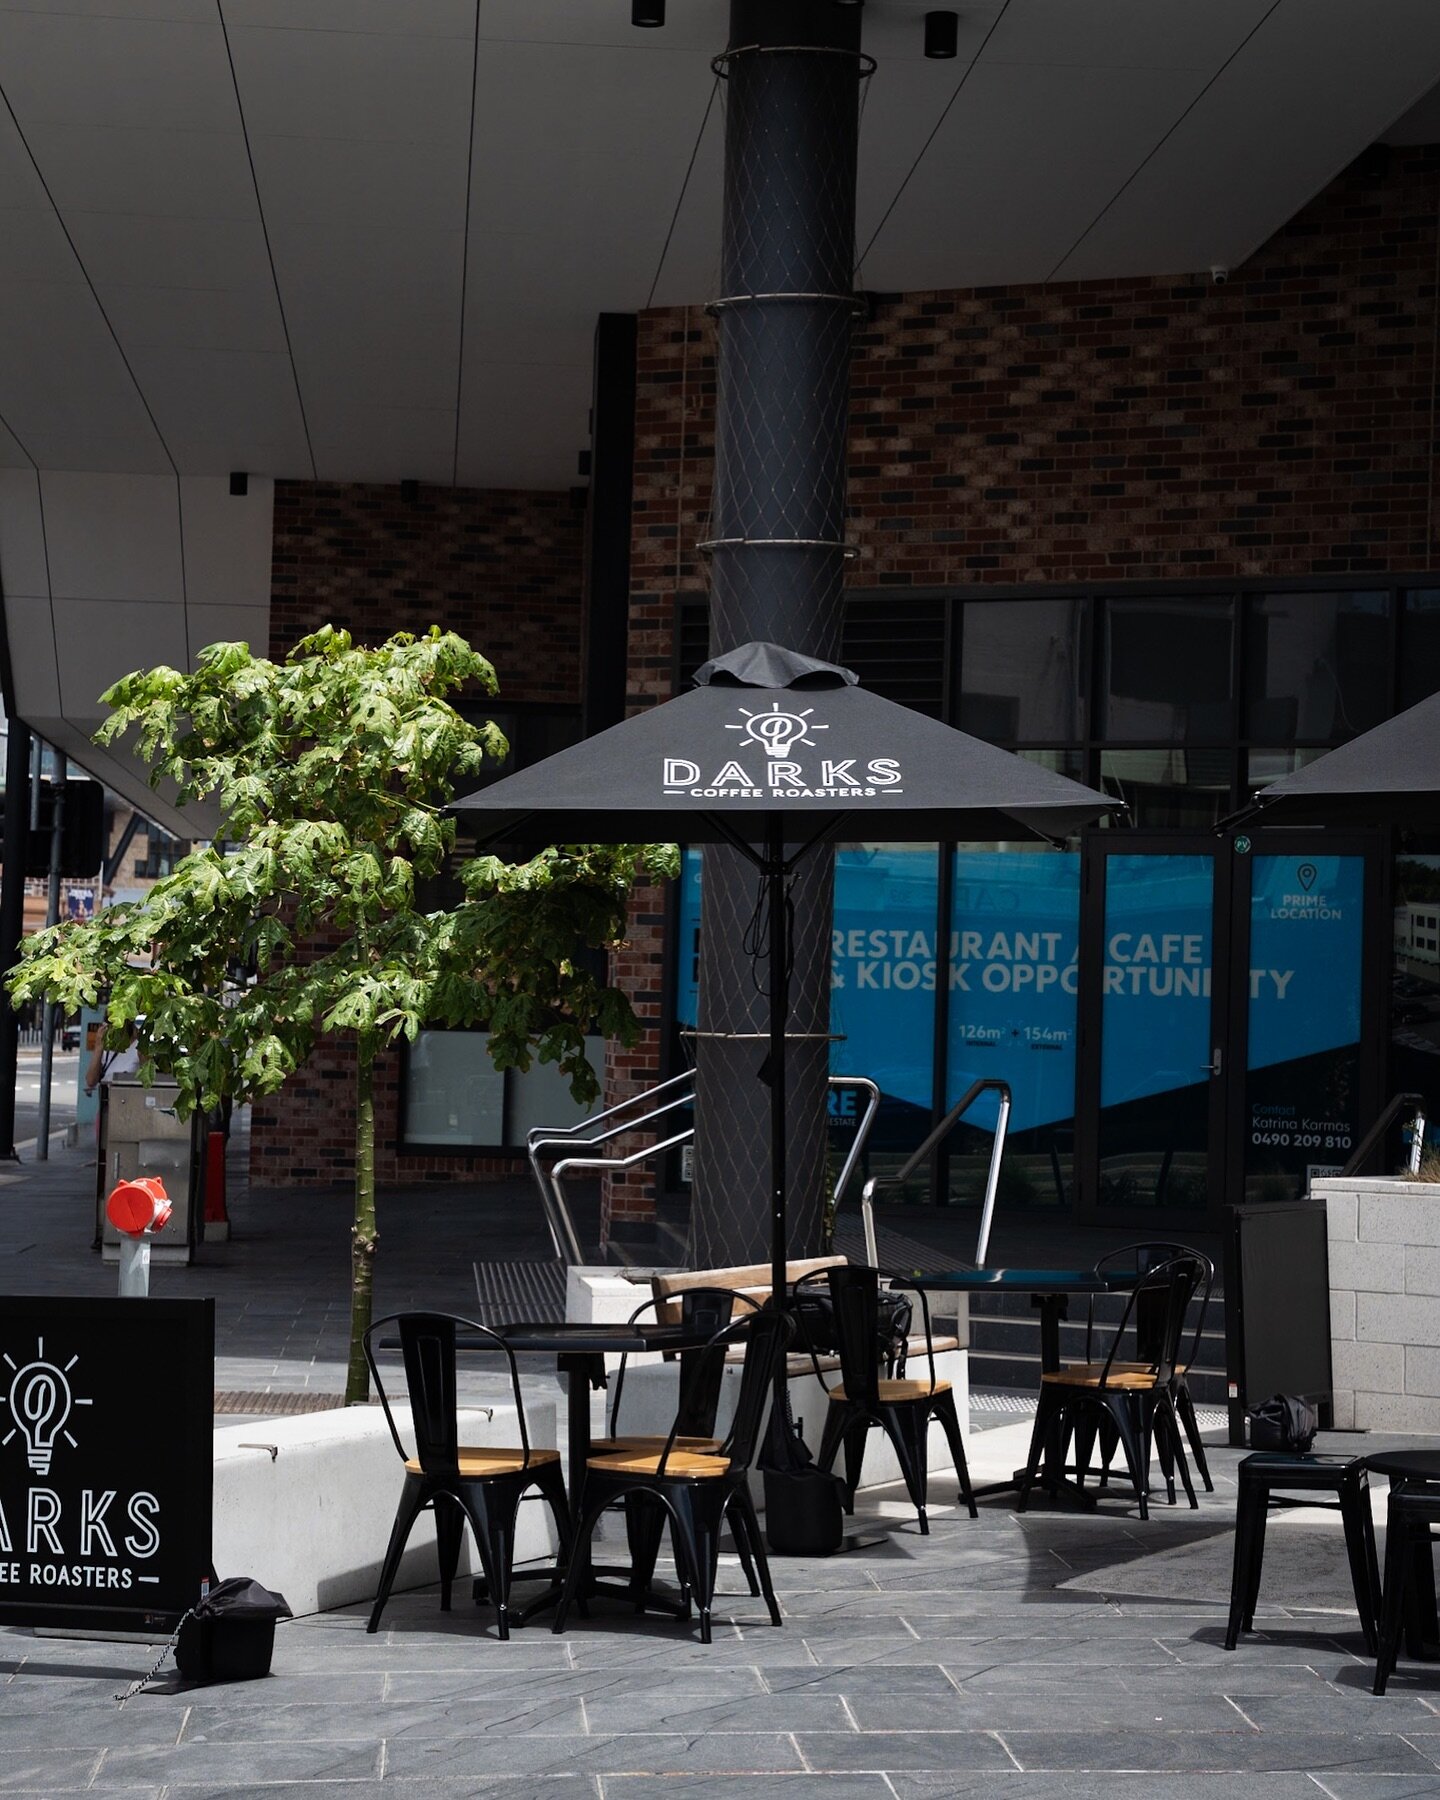 What&rsquo;s your favourite spot to get your daily Darks Coffee Fix?☕️

#darkscoffeeroasters #coffeeroasters